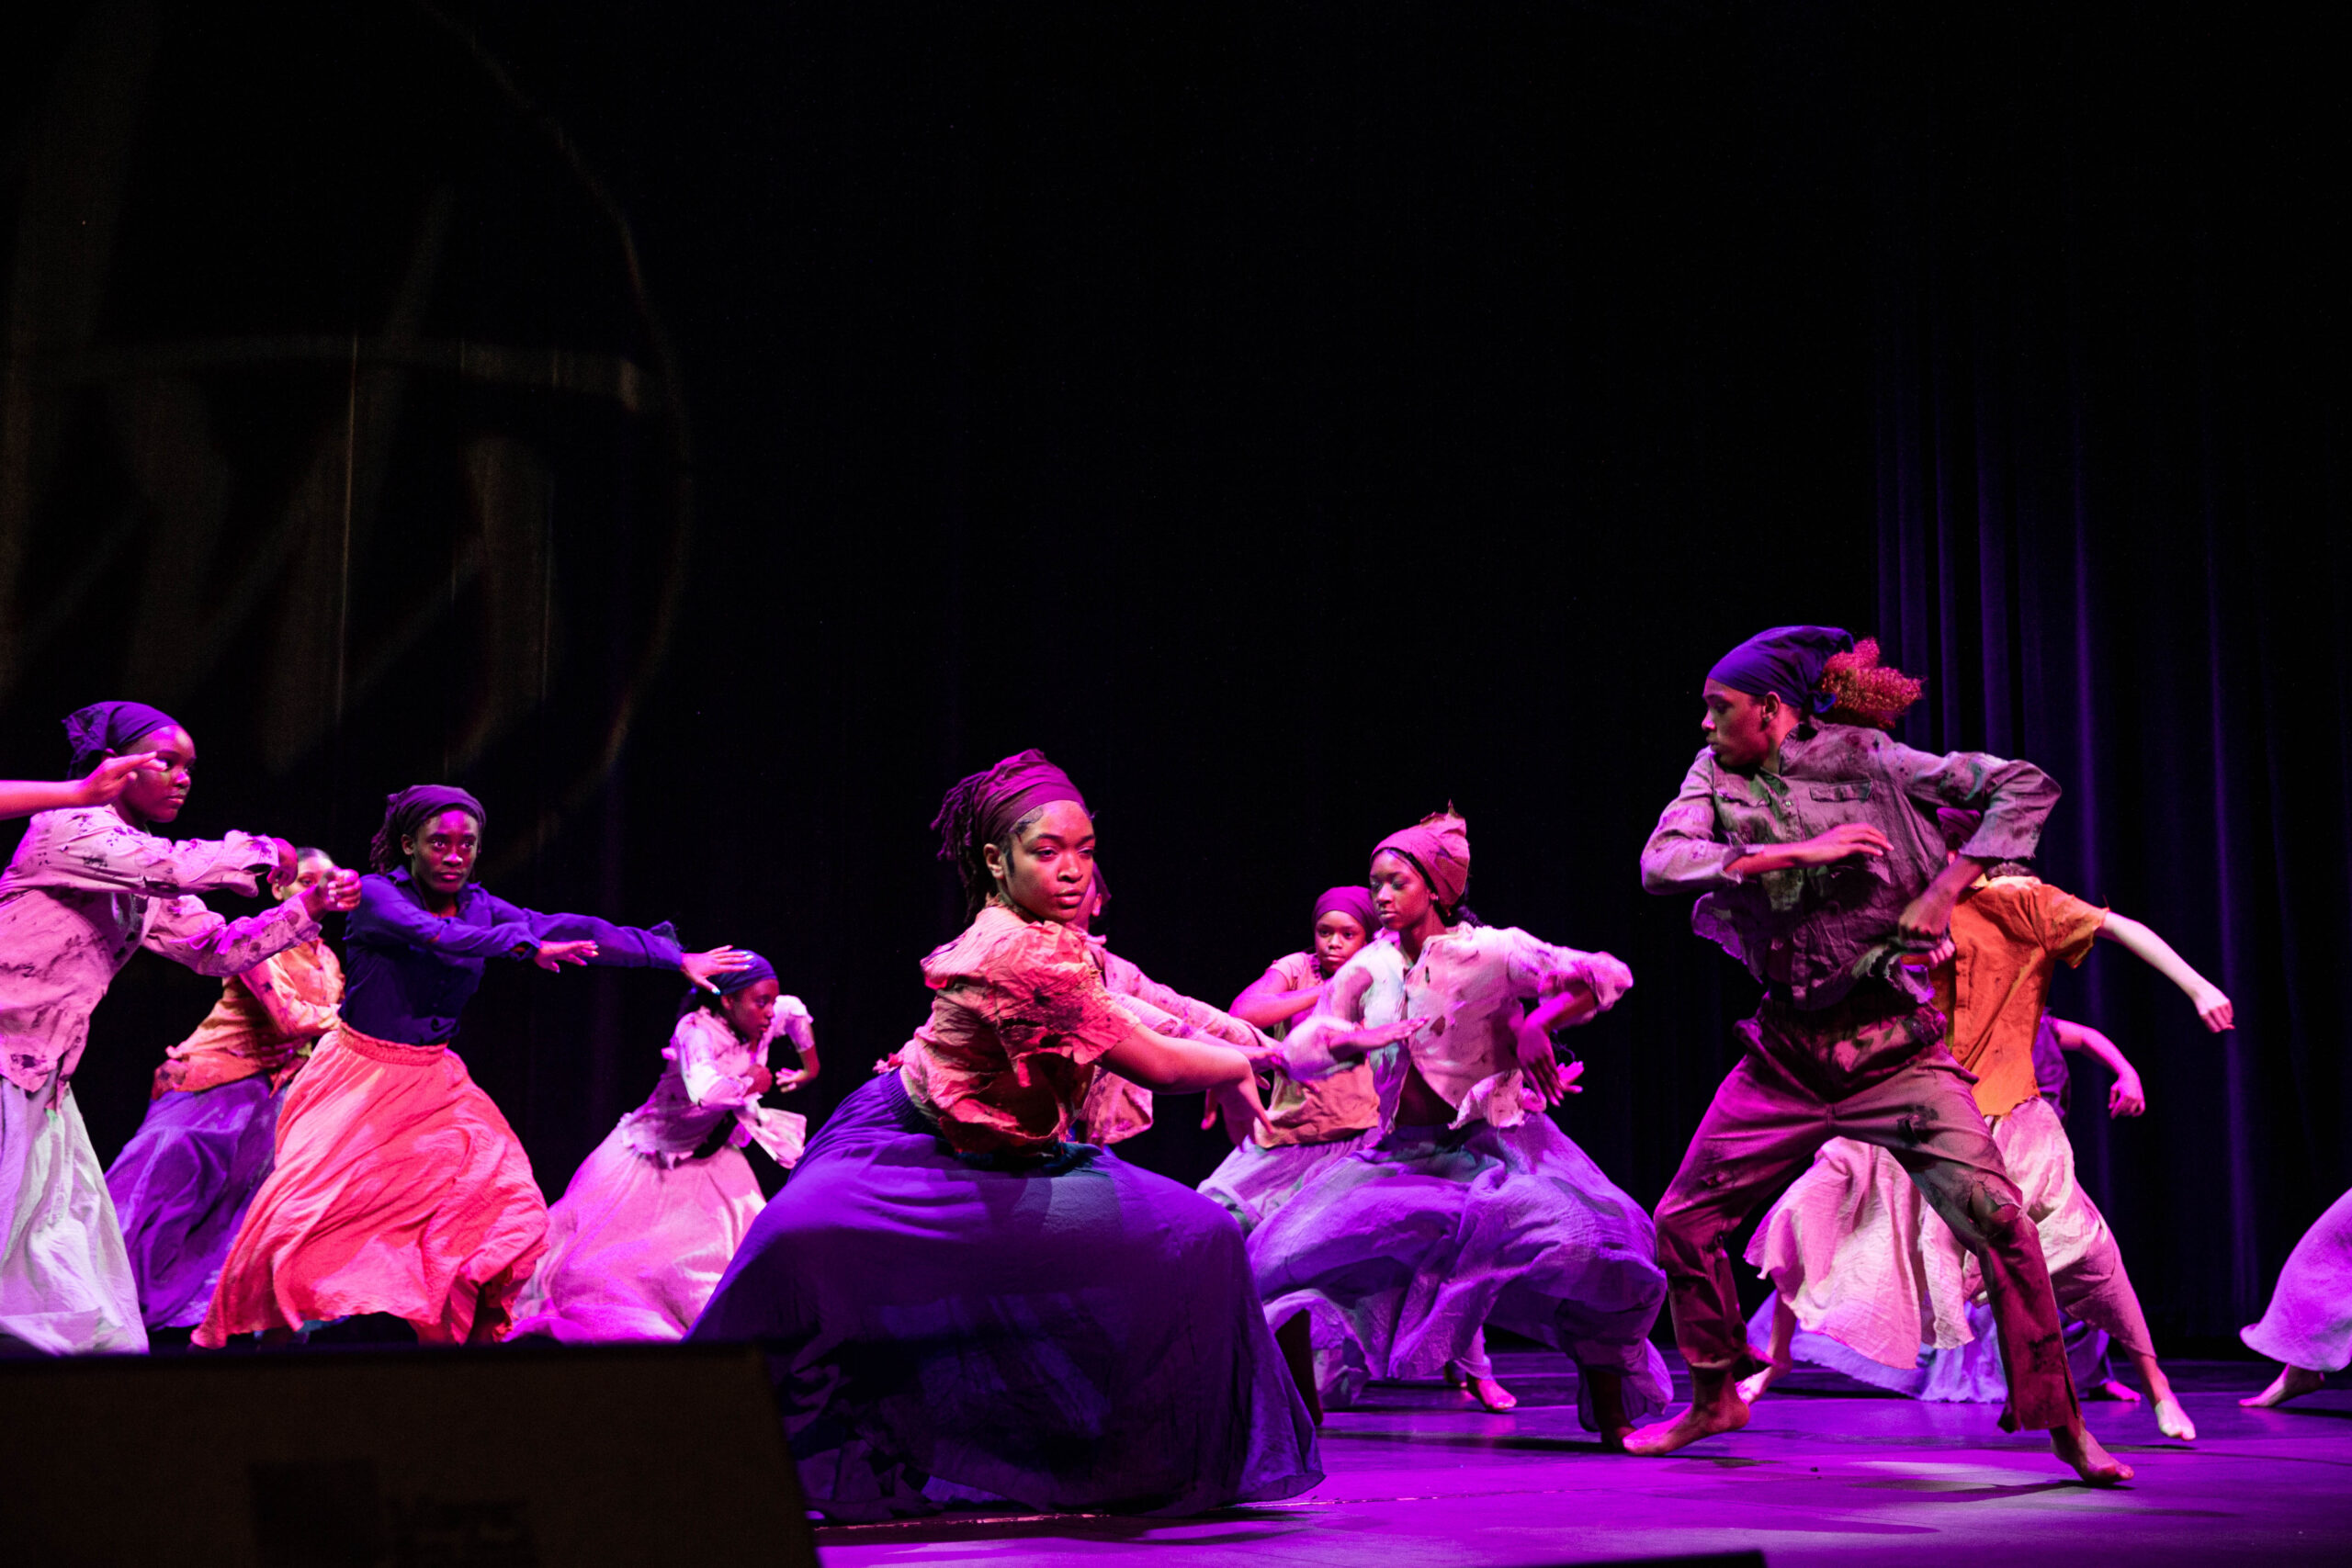 A group of performers in the midst of a dance, lit with purple light. They are performing a piece called "Harriet," inspired by Harriet Tubman.